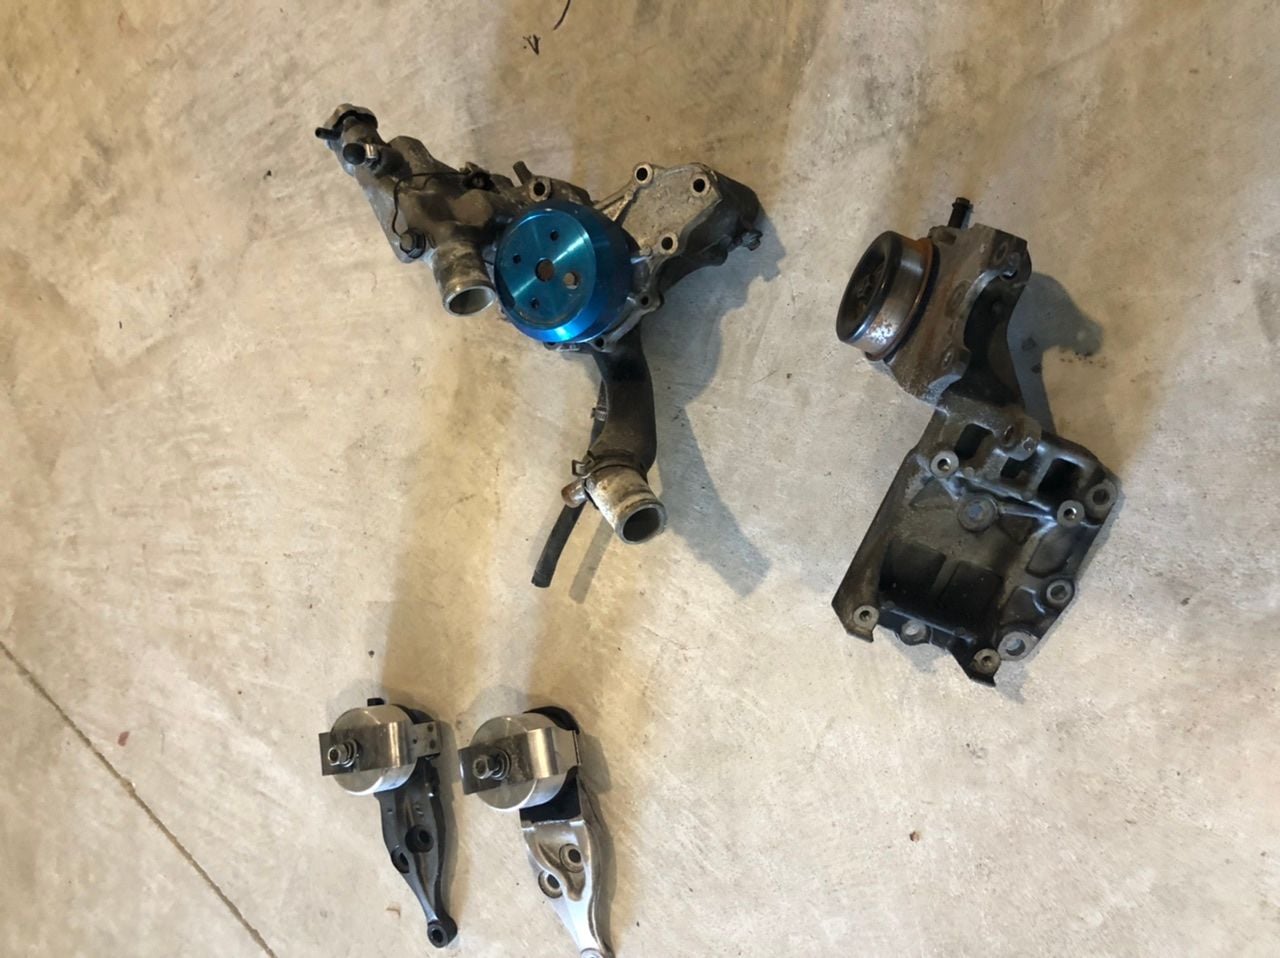 Miscellaneous - Upper intake,TPS,ThrottleBody,Motor mounts,Complete Axles - Used - 1992 to 2006 Mazda RX-7 - Charleston, SC 29492, United States